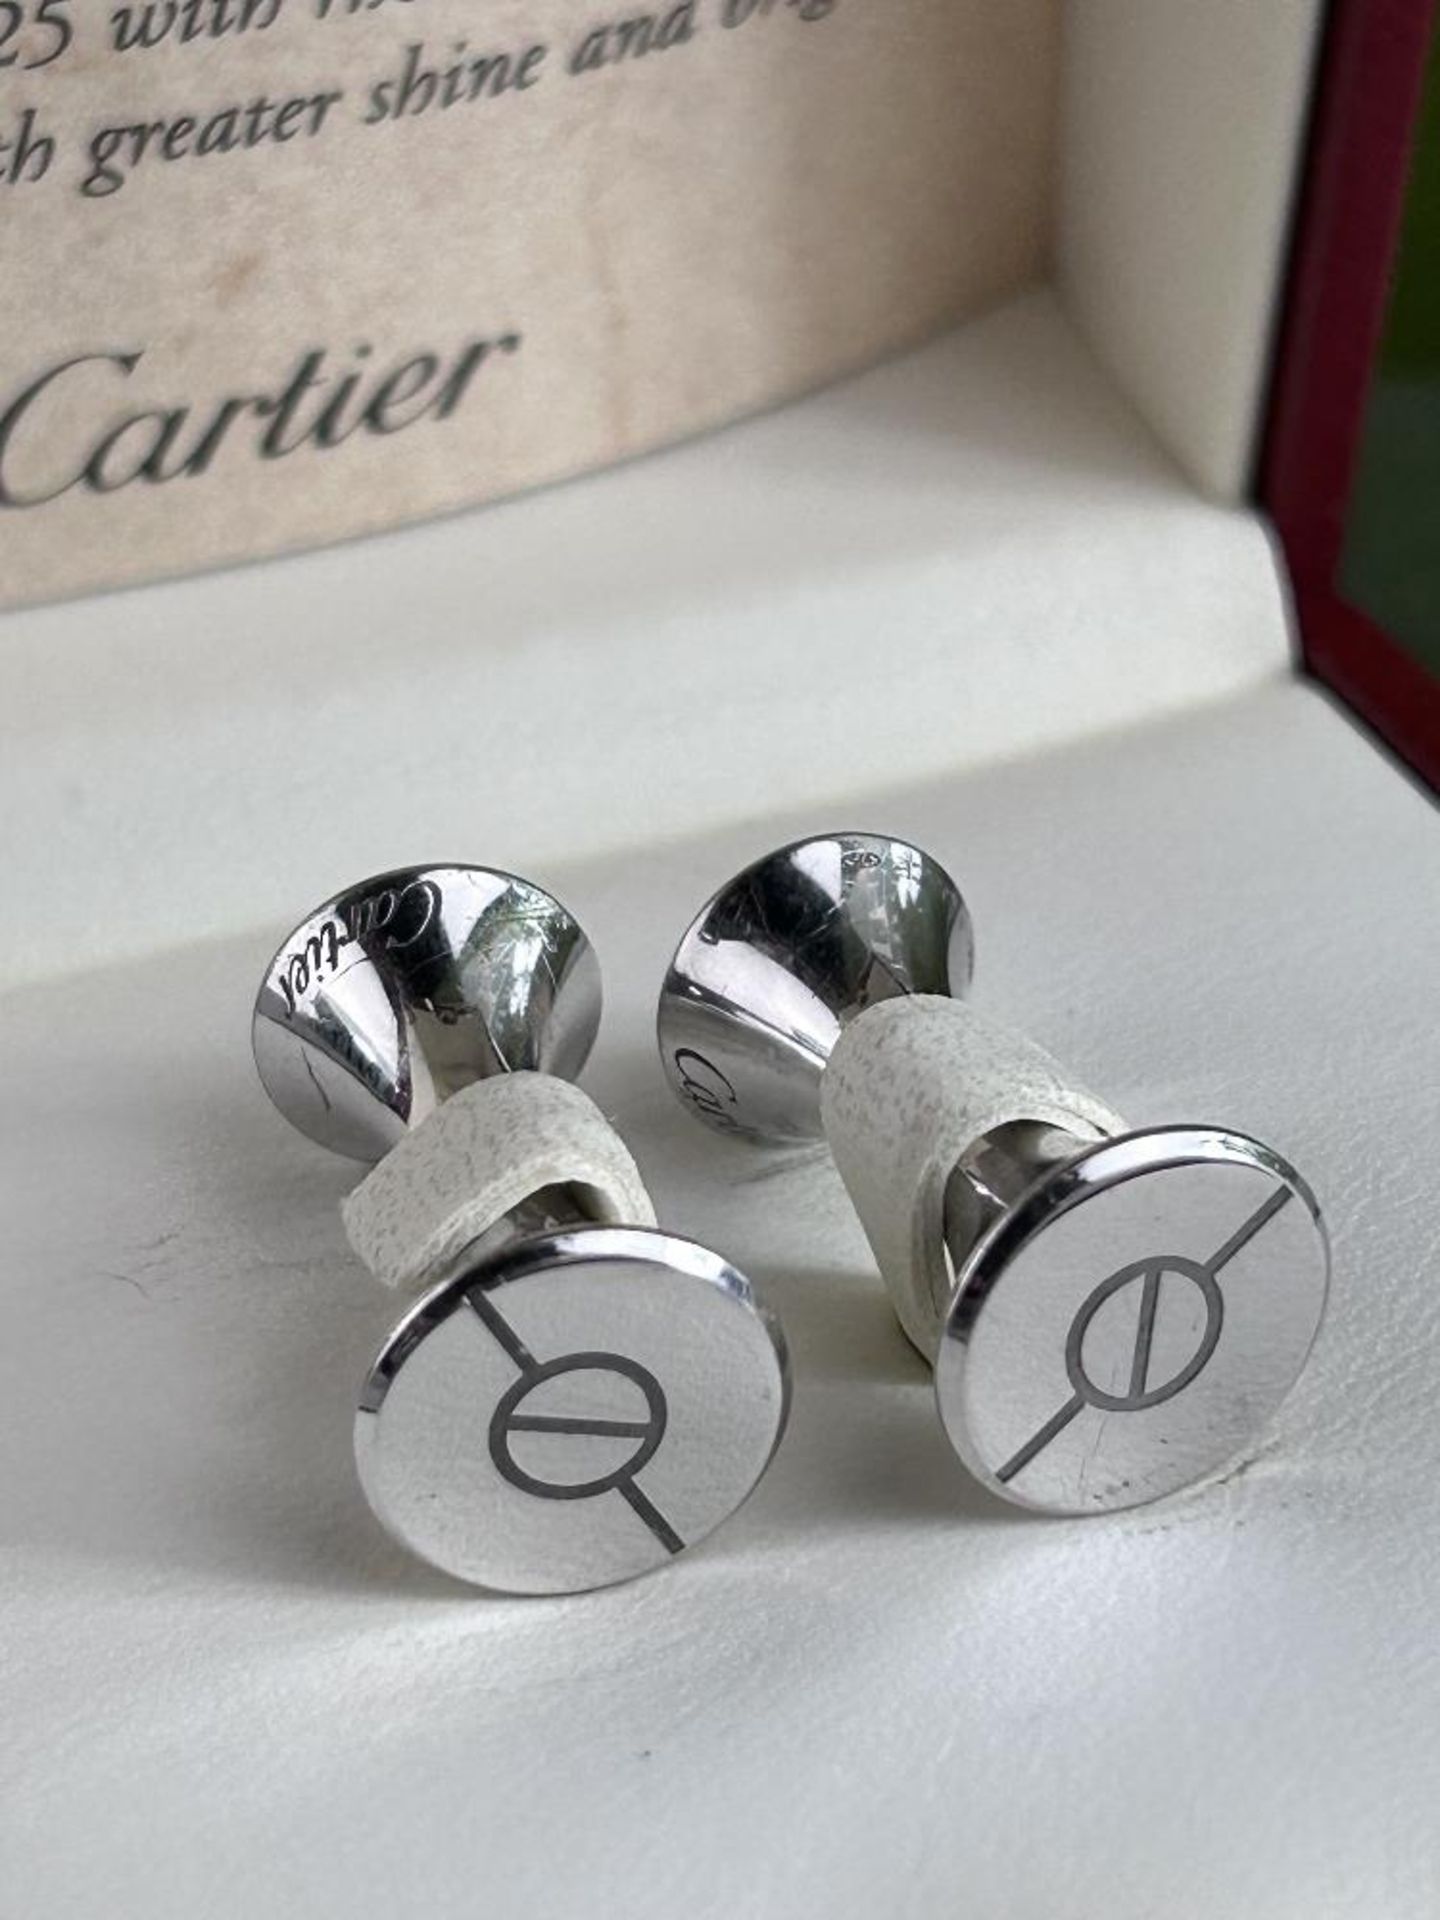 Cartier Sterling Silver Signature Screw Design Love Collection Cufflinks - Image 5 of 5